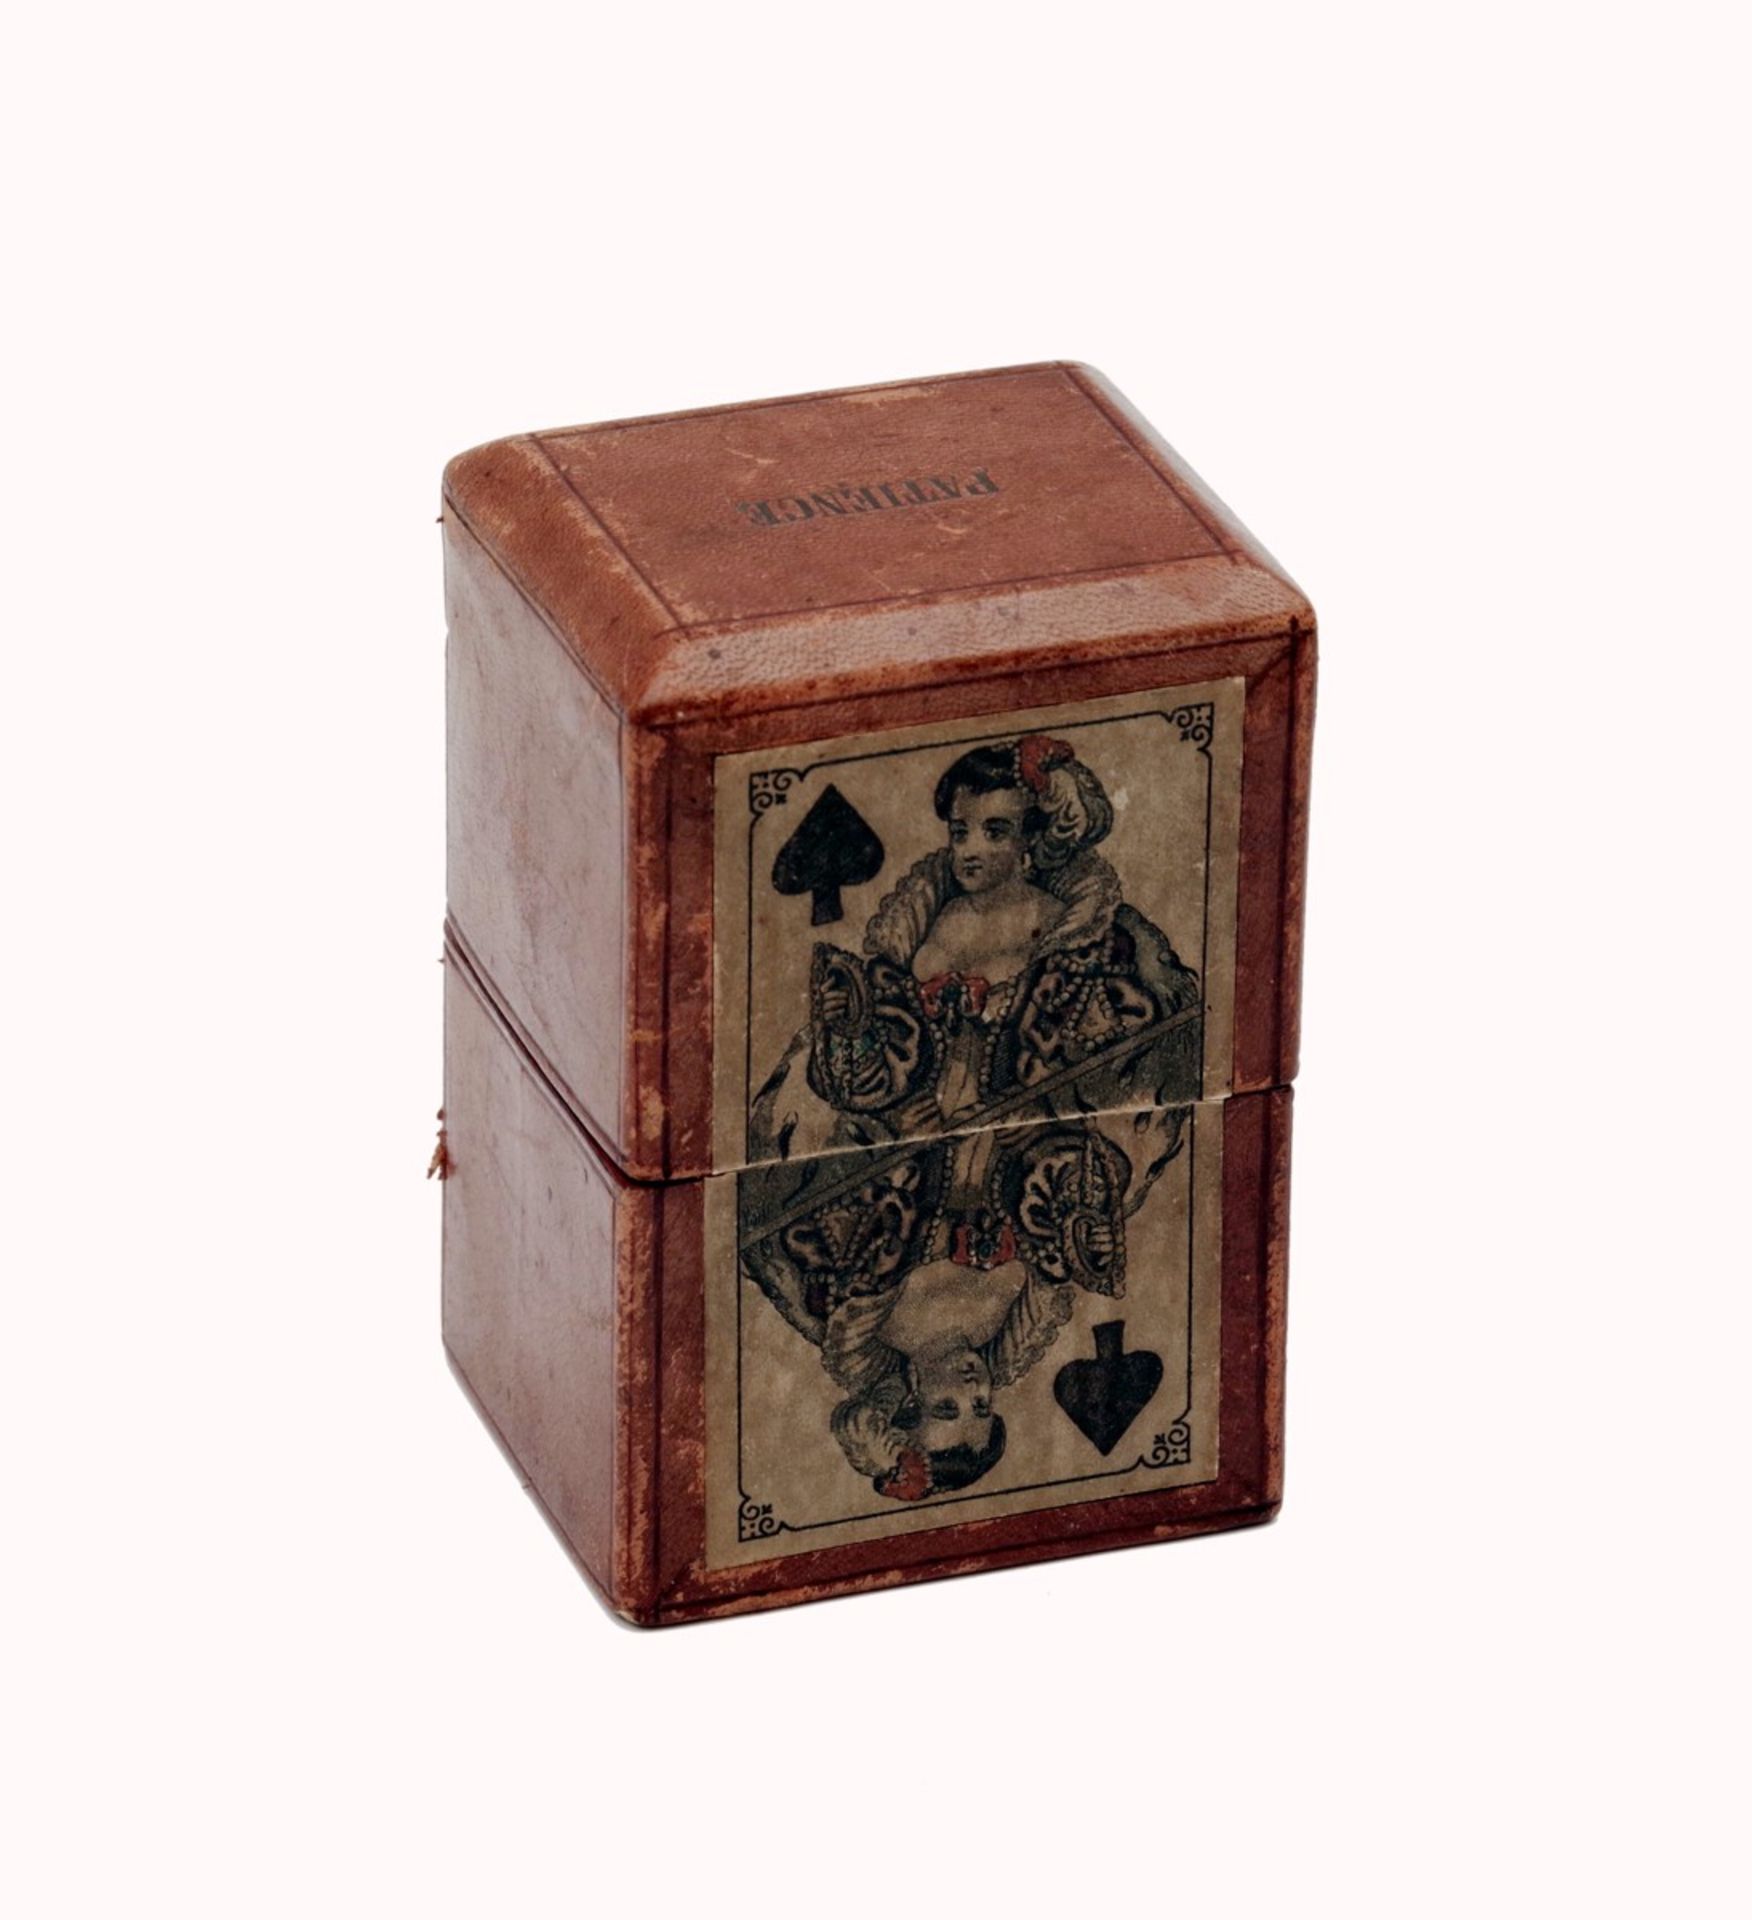 A Josef Glanz “Patience” Playing Cards